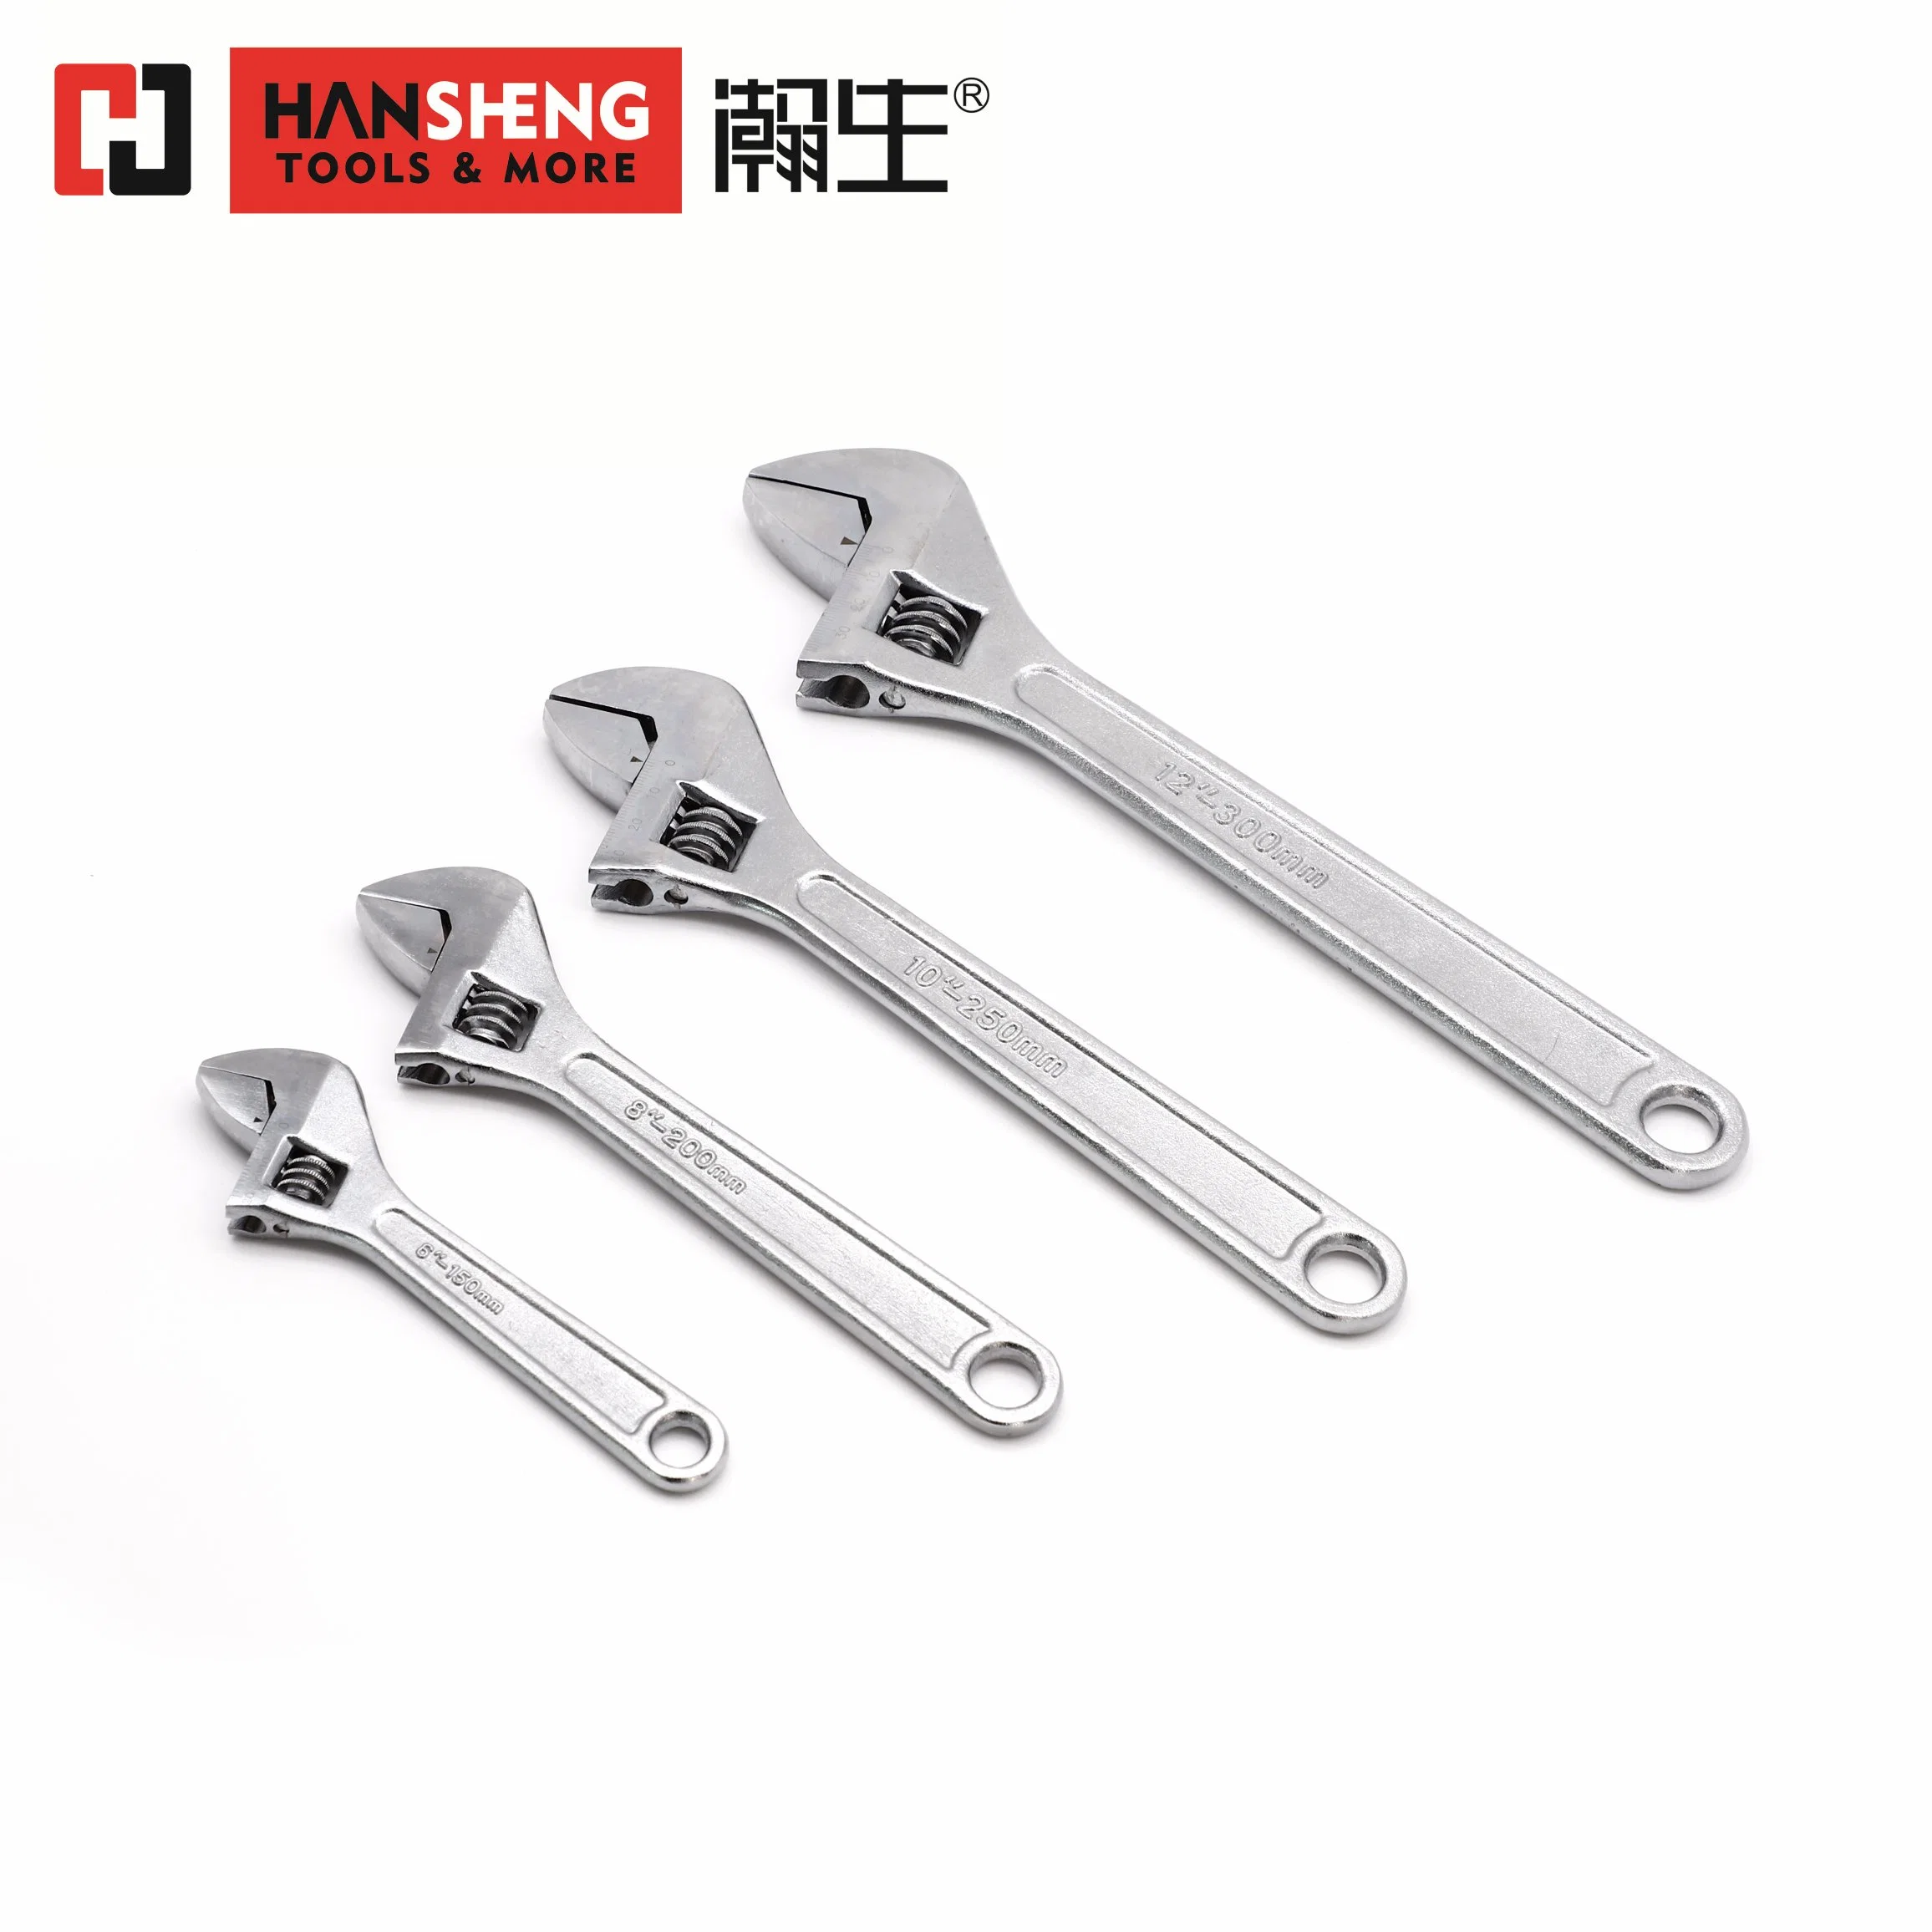 Professional Hand Tool, Hardware, High quality/High cost performance , Adjustable Wrench, Adjustable Spanner